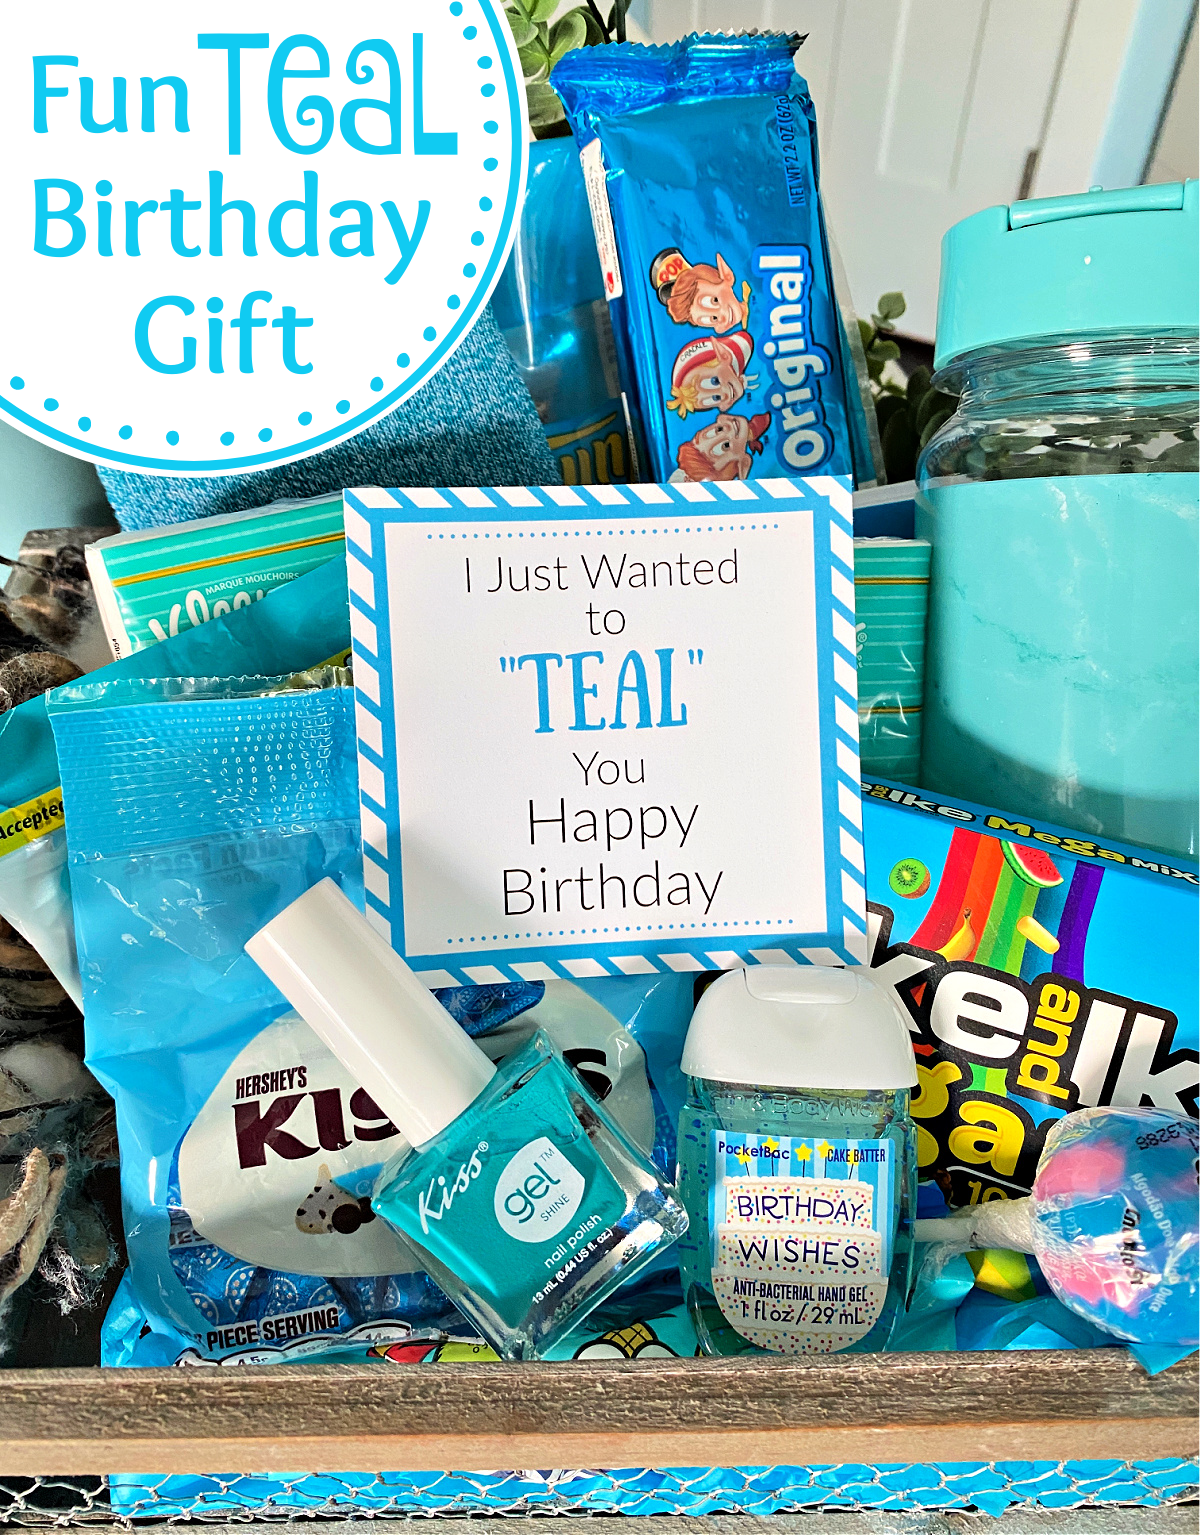 Teal Themed Fun Birthday Gift. This fun birthday gift is perfect for anyone who loves teal. It's super simple and such a fun birthday gift. #funbirthdaygift #birthdaygift #tealgift #fungifts 